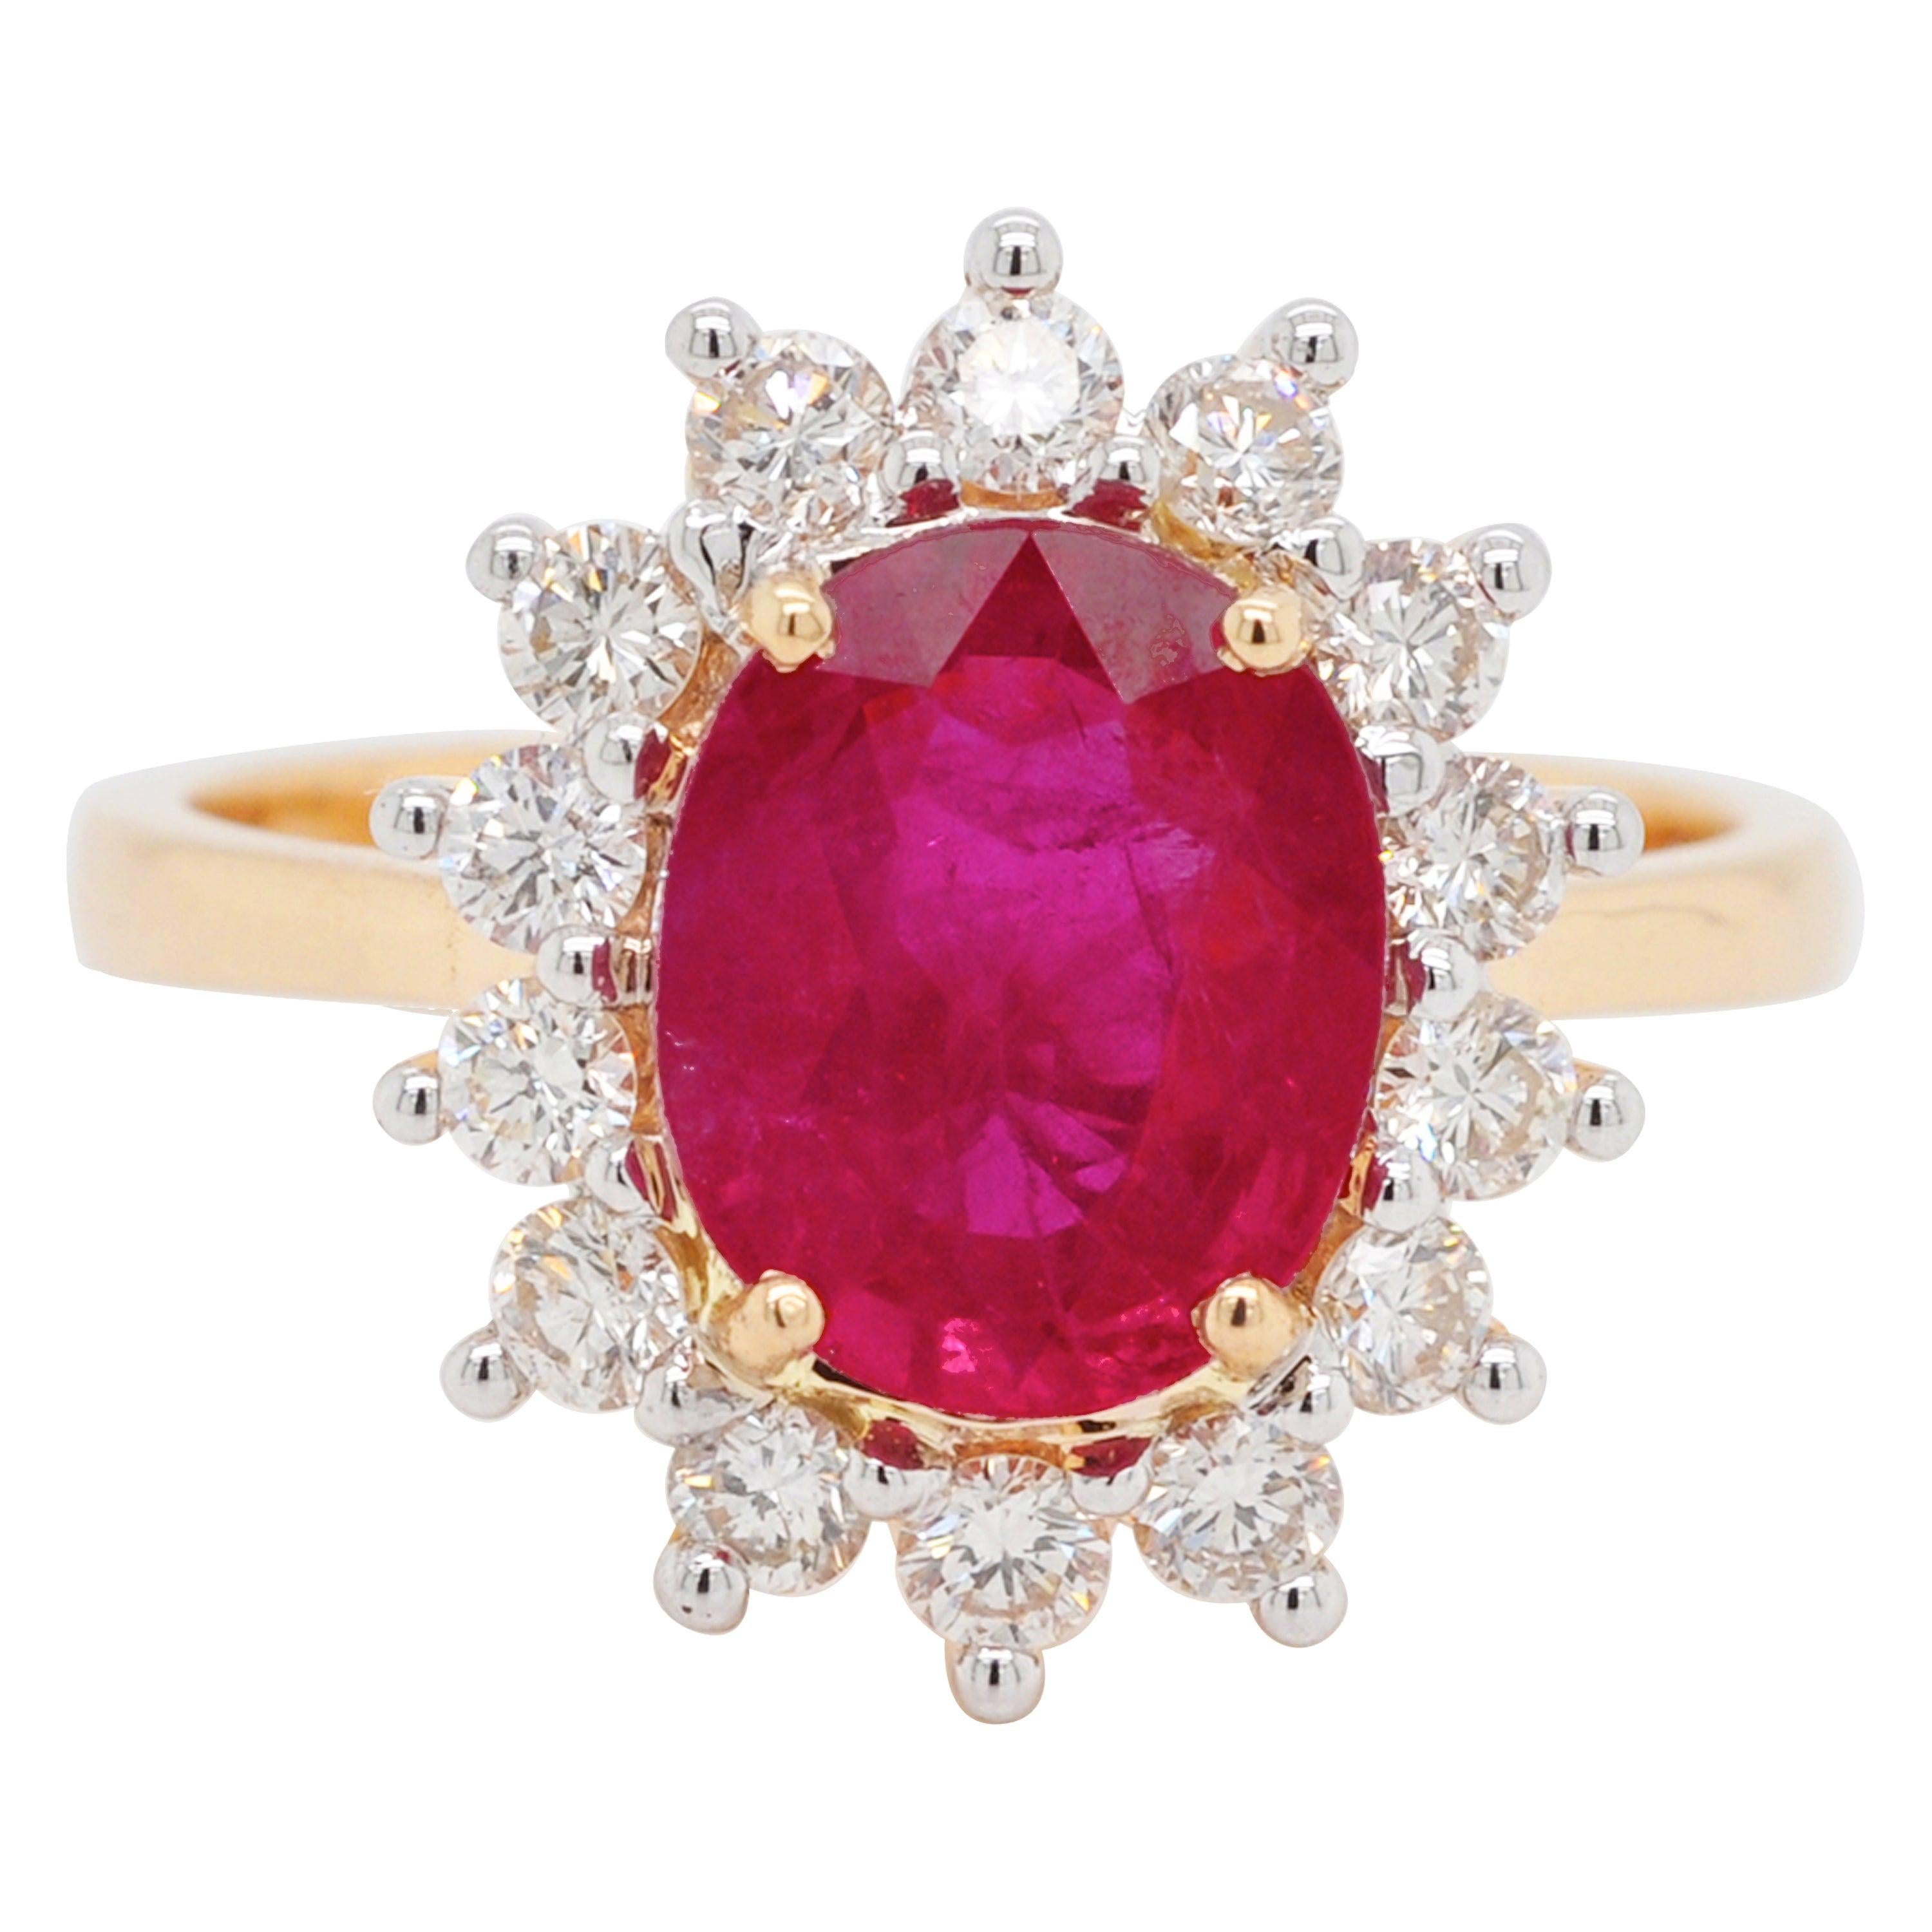 18K Gold Oval Certified Mozambique Ruby Diamond Cluster Engagement Bridal Ring